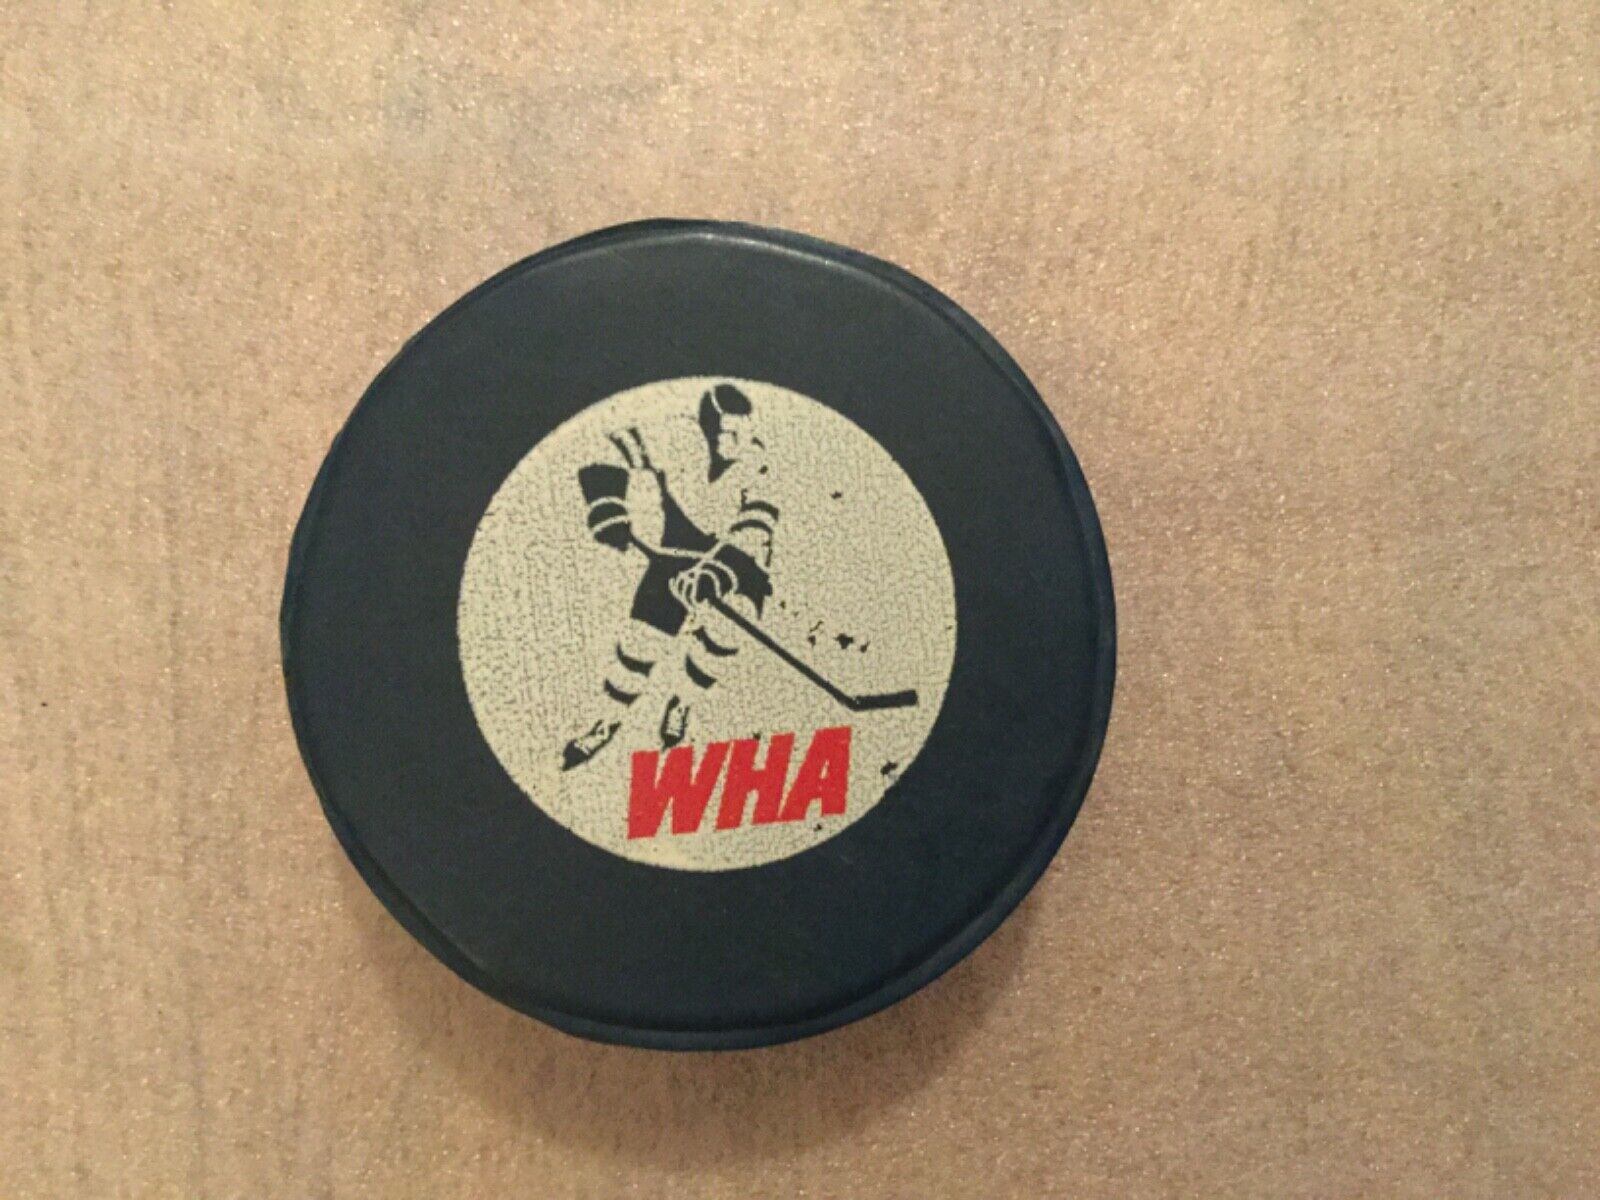 WHA World Hockey Association Blue Max 80% OFF Sale SALE% OFF puck 1972 game vintage